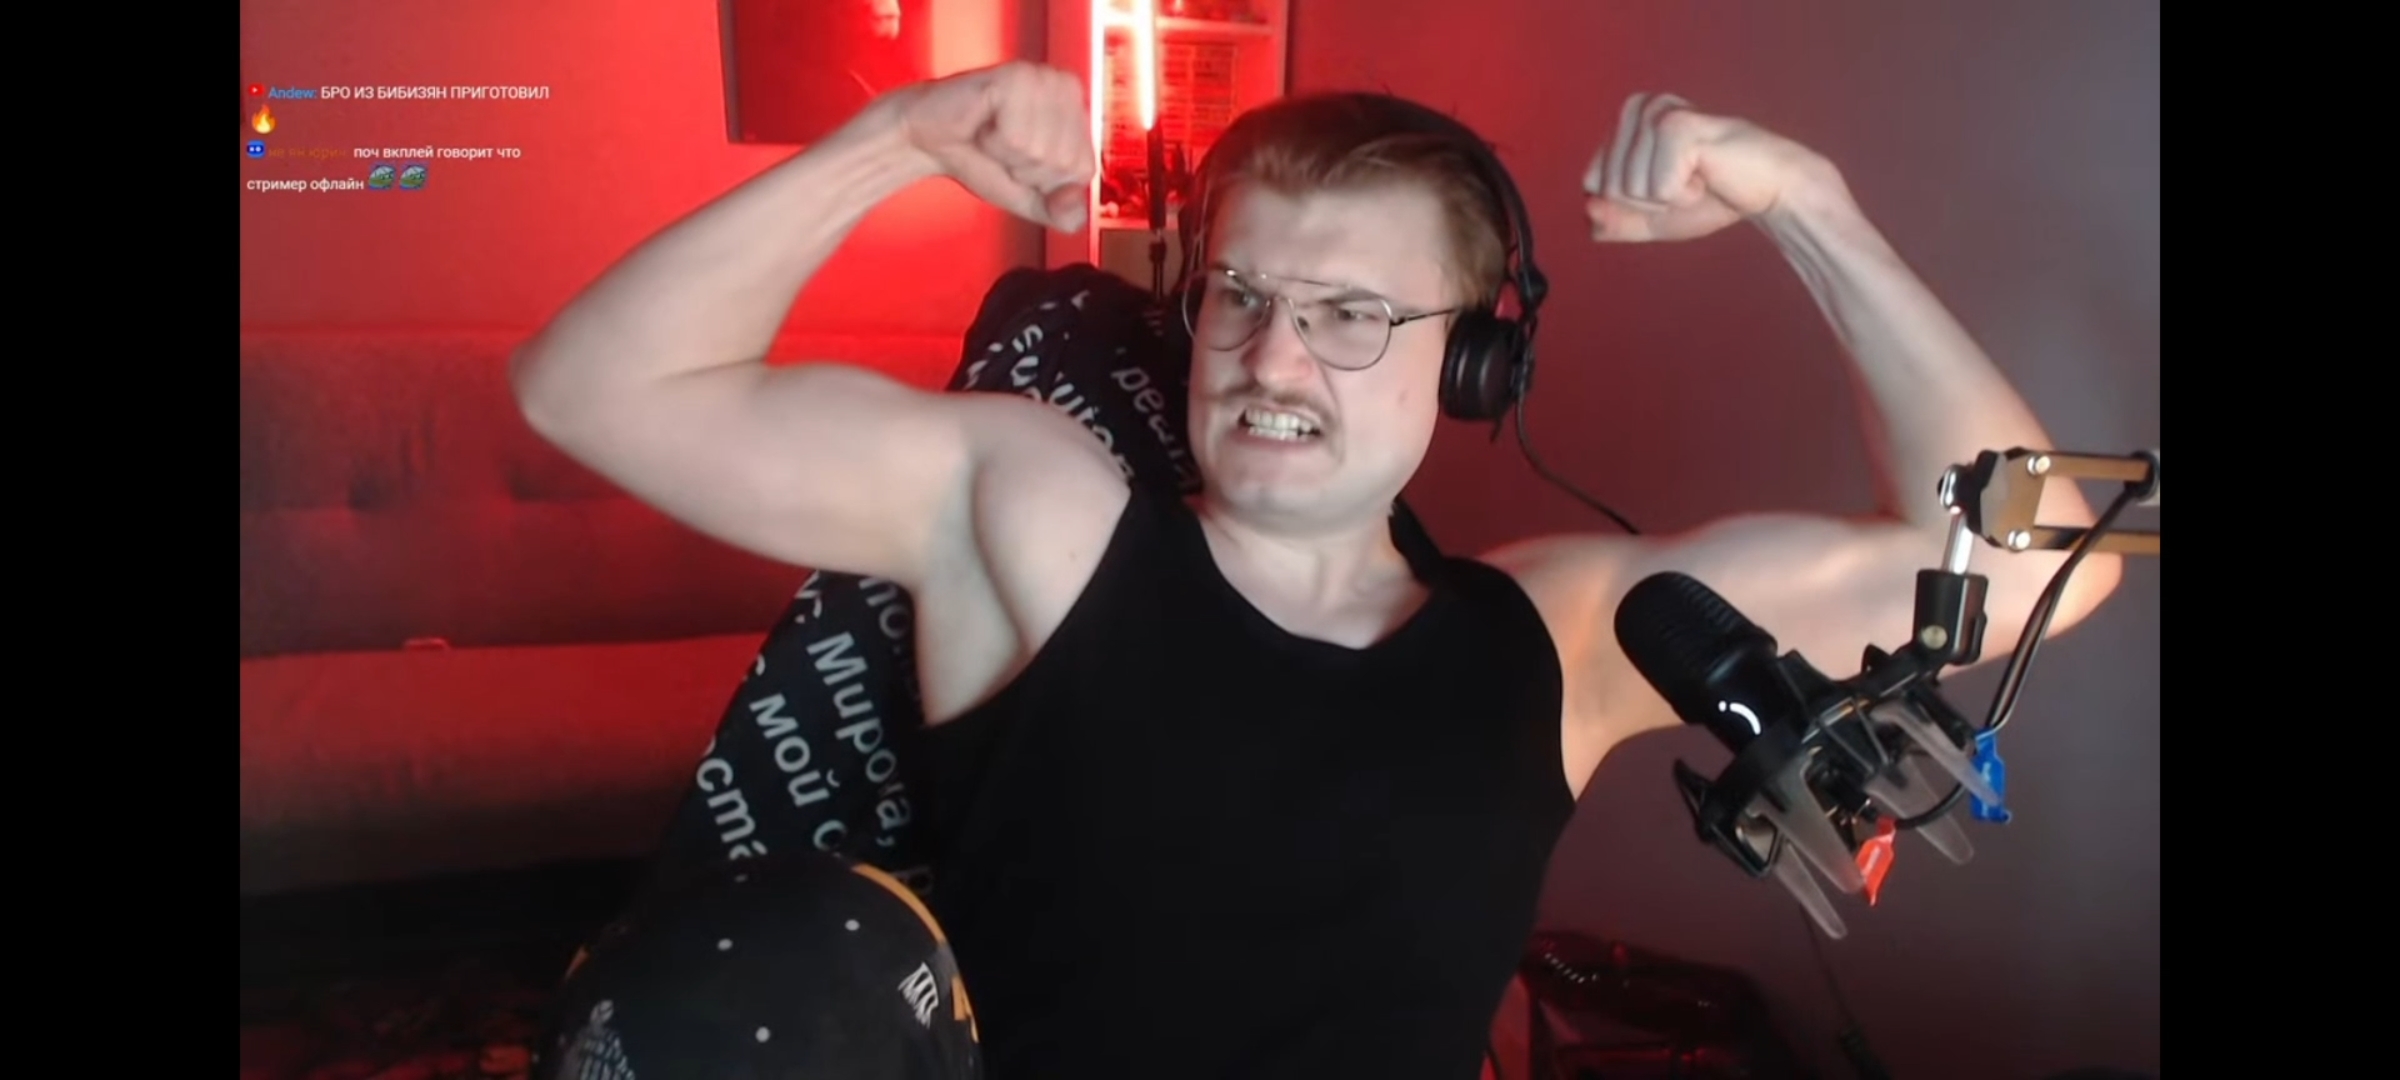 New muscle flex from Russian guy